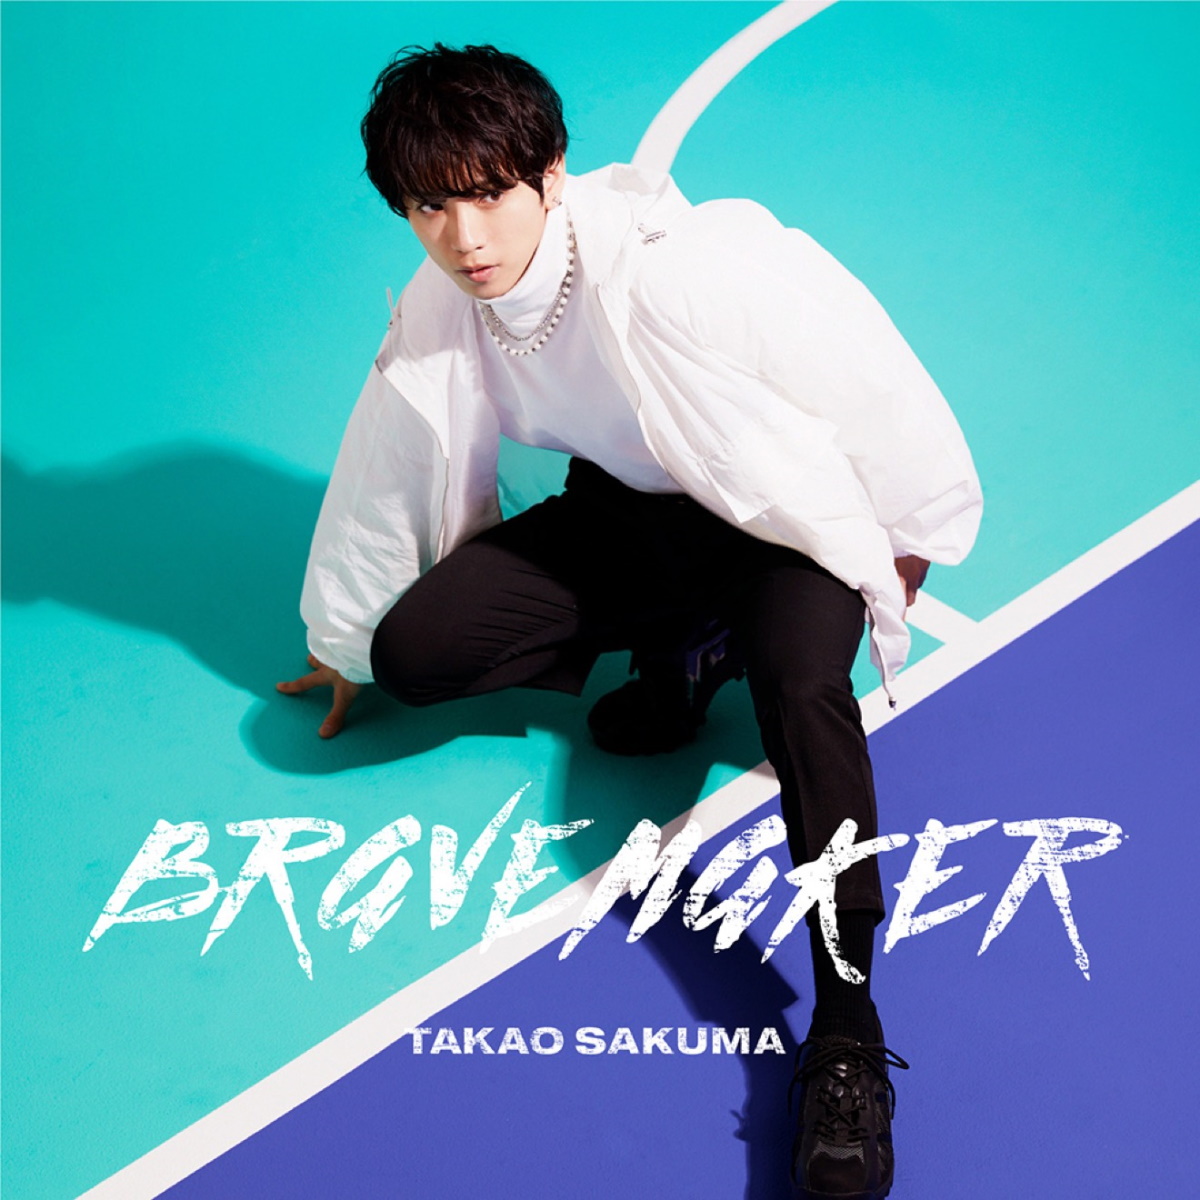 Cover art for『Takao Sakuma - Kiss』from the release『BRAVE MAKER』